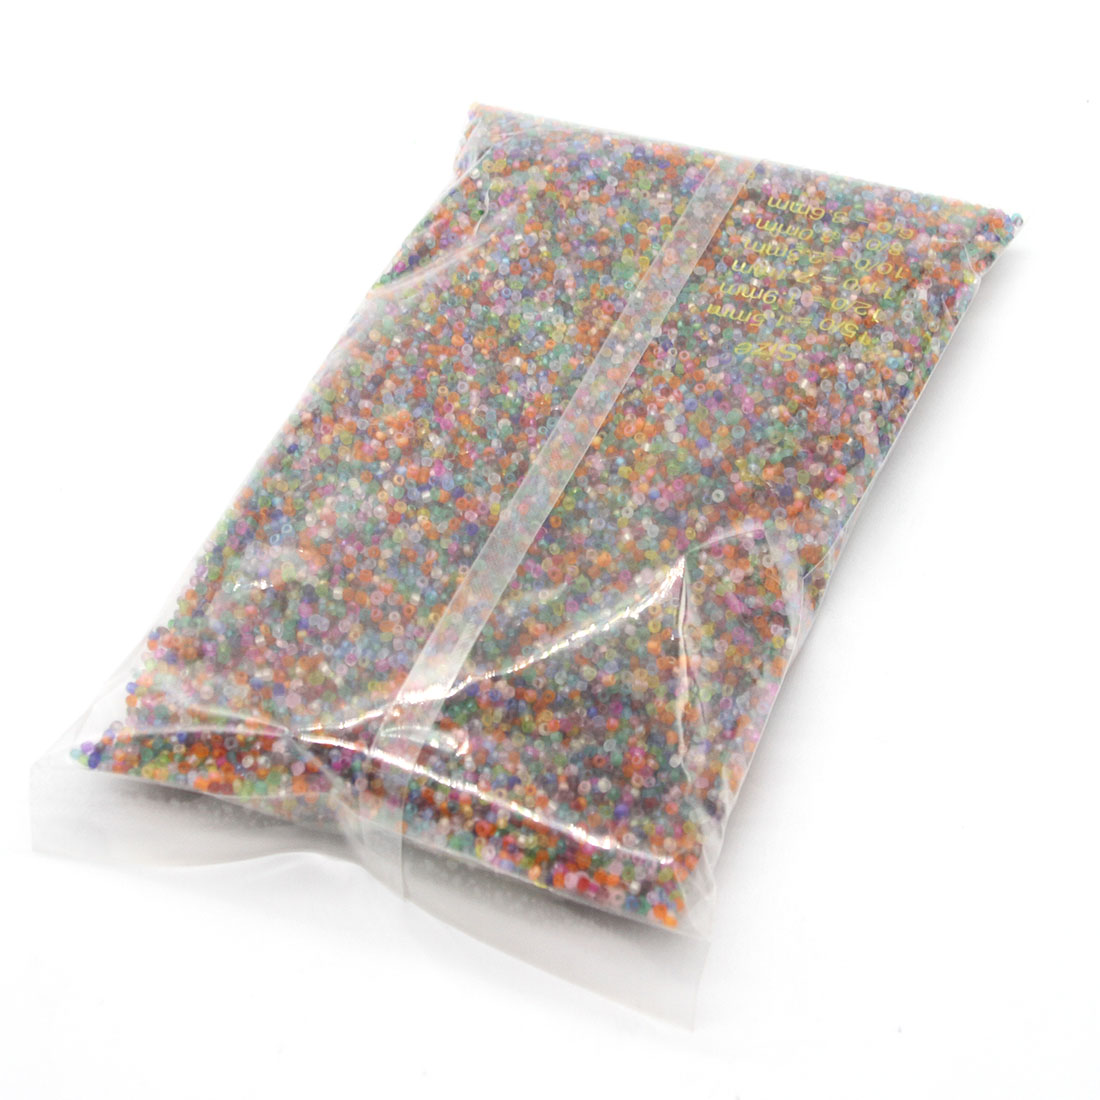 Mixed color 3mm 10,000 packs